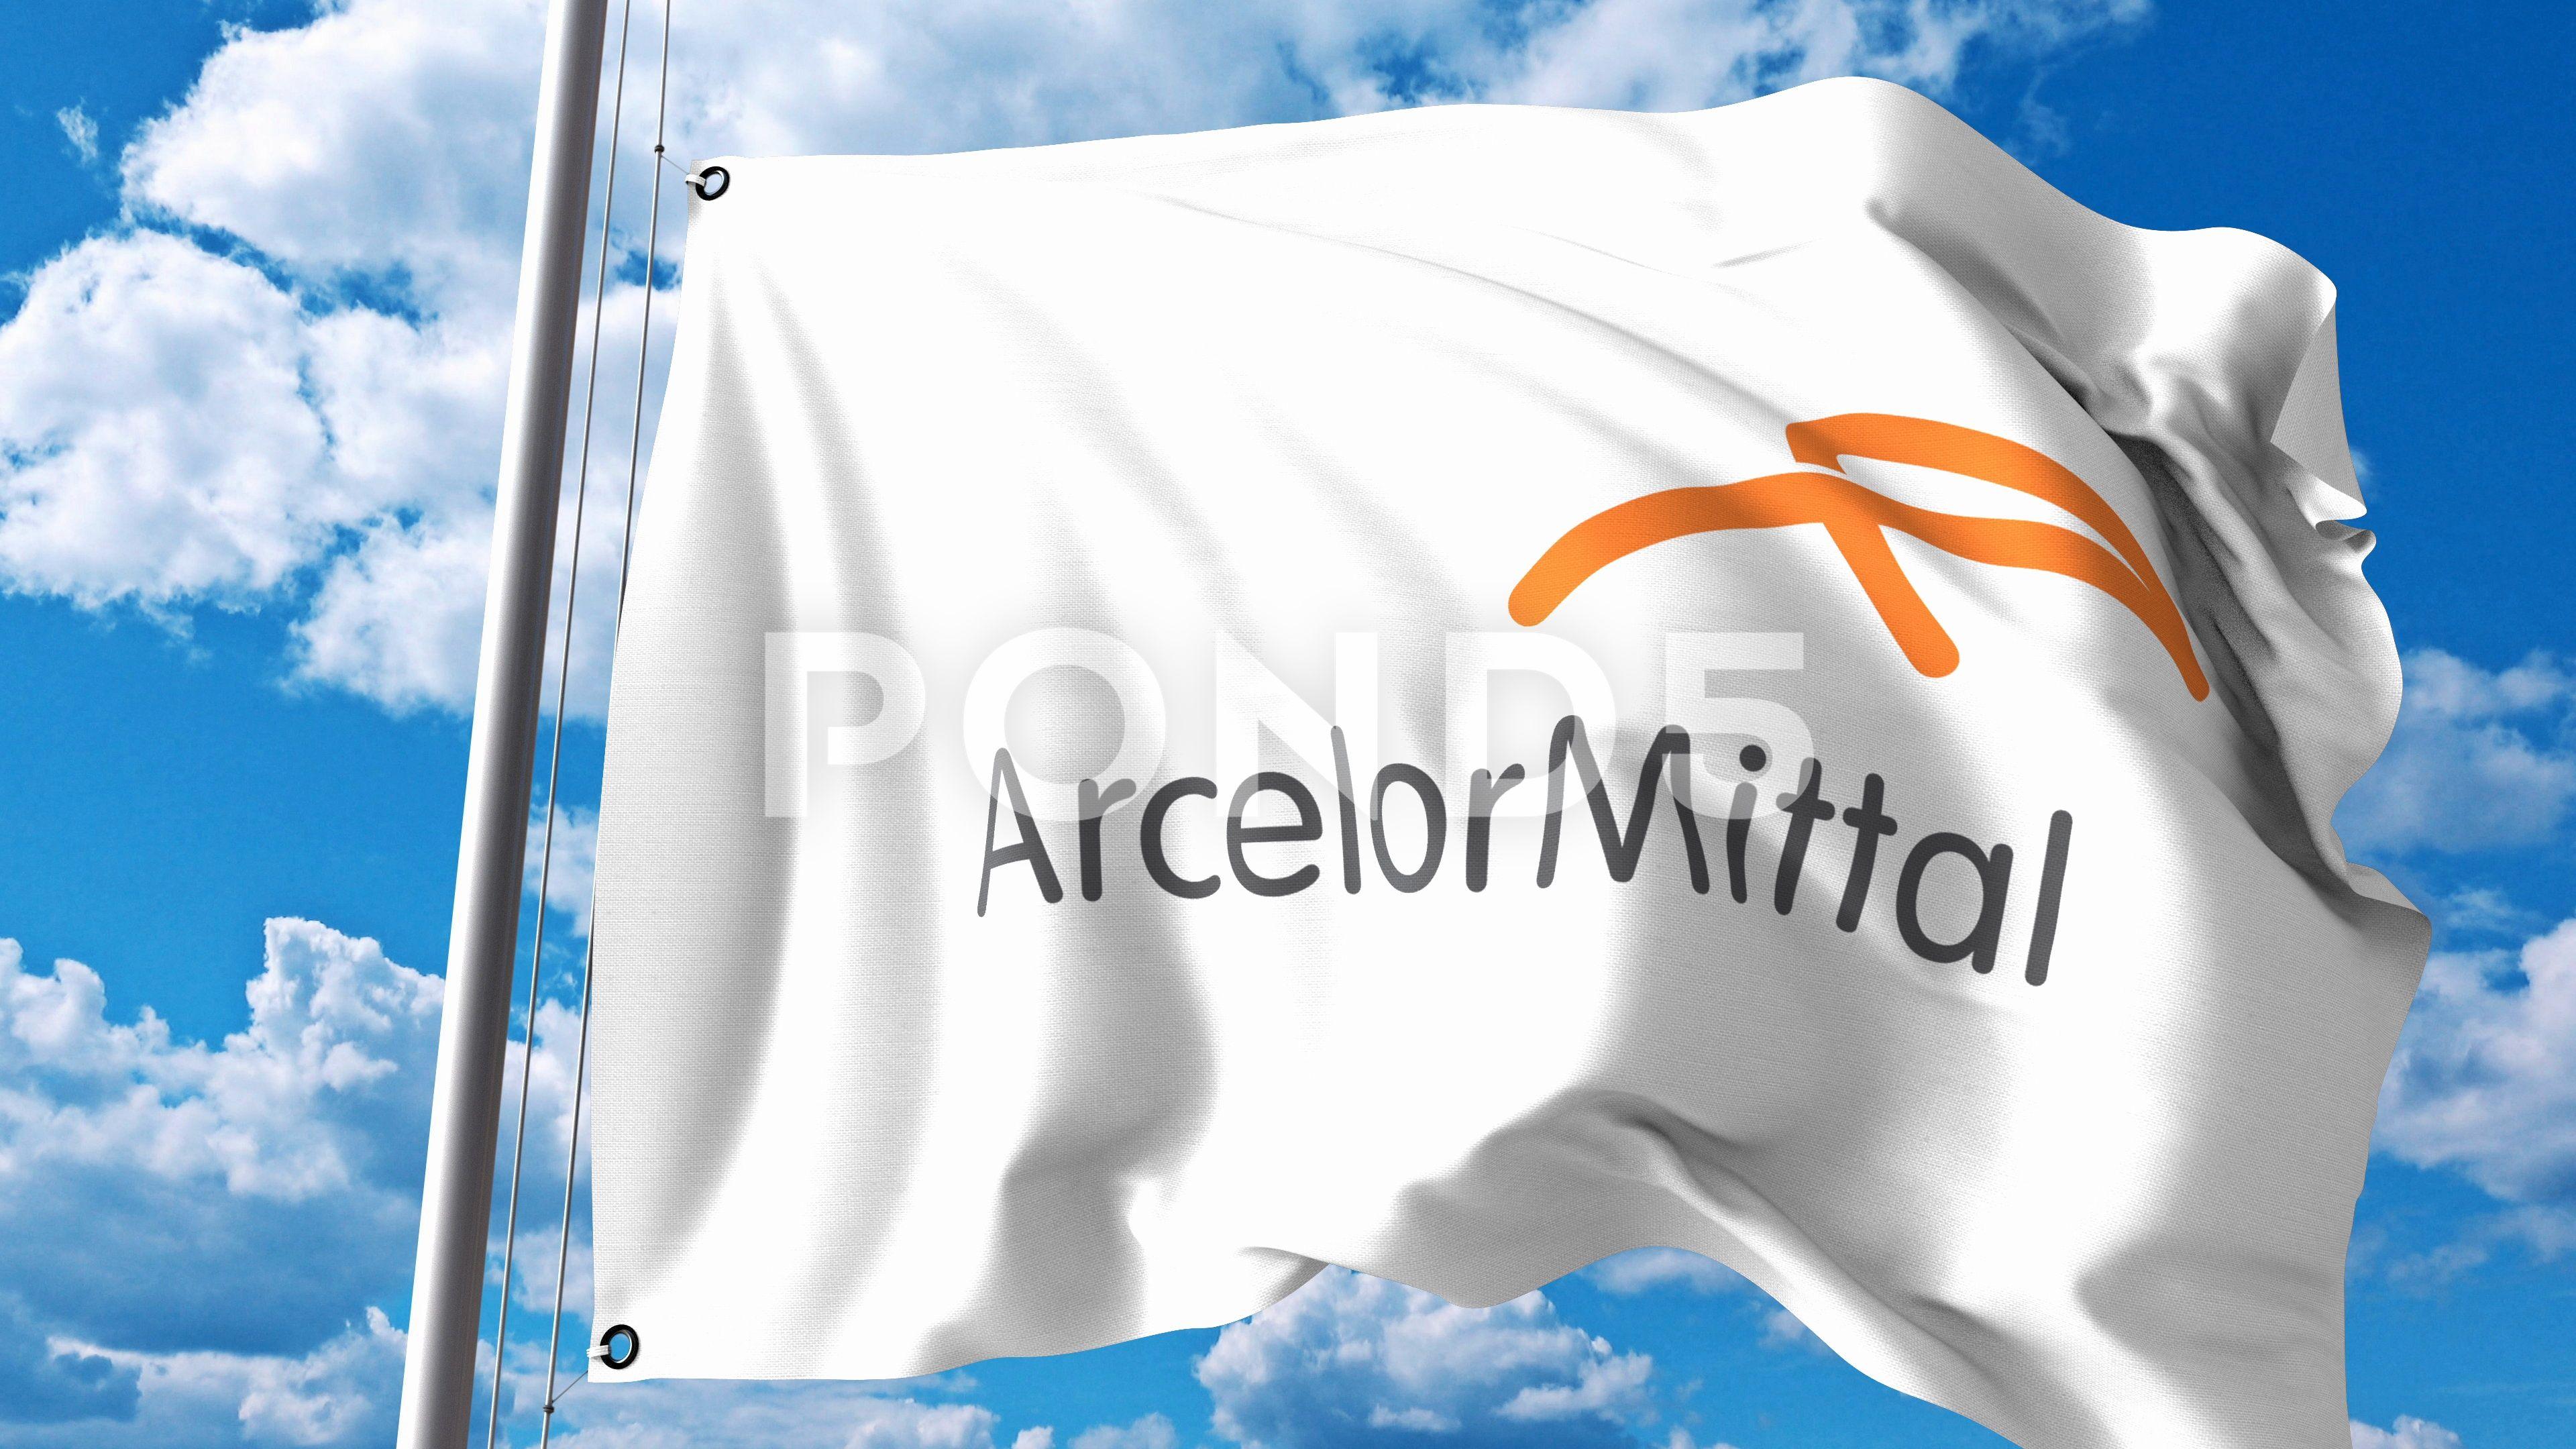 ArcelorMittal Logo - Video: Waving flag with ArcelorMittal logo against clouds and sky ...